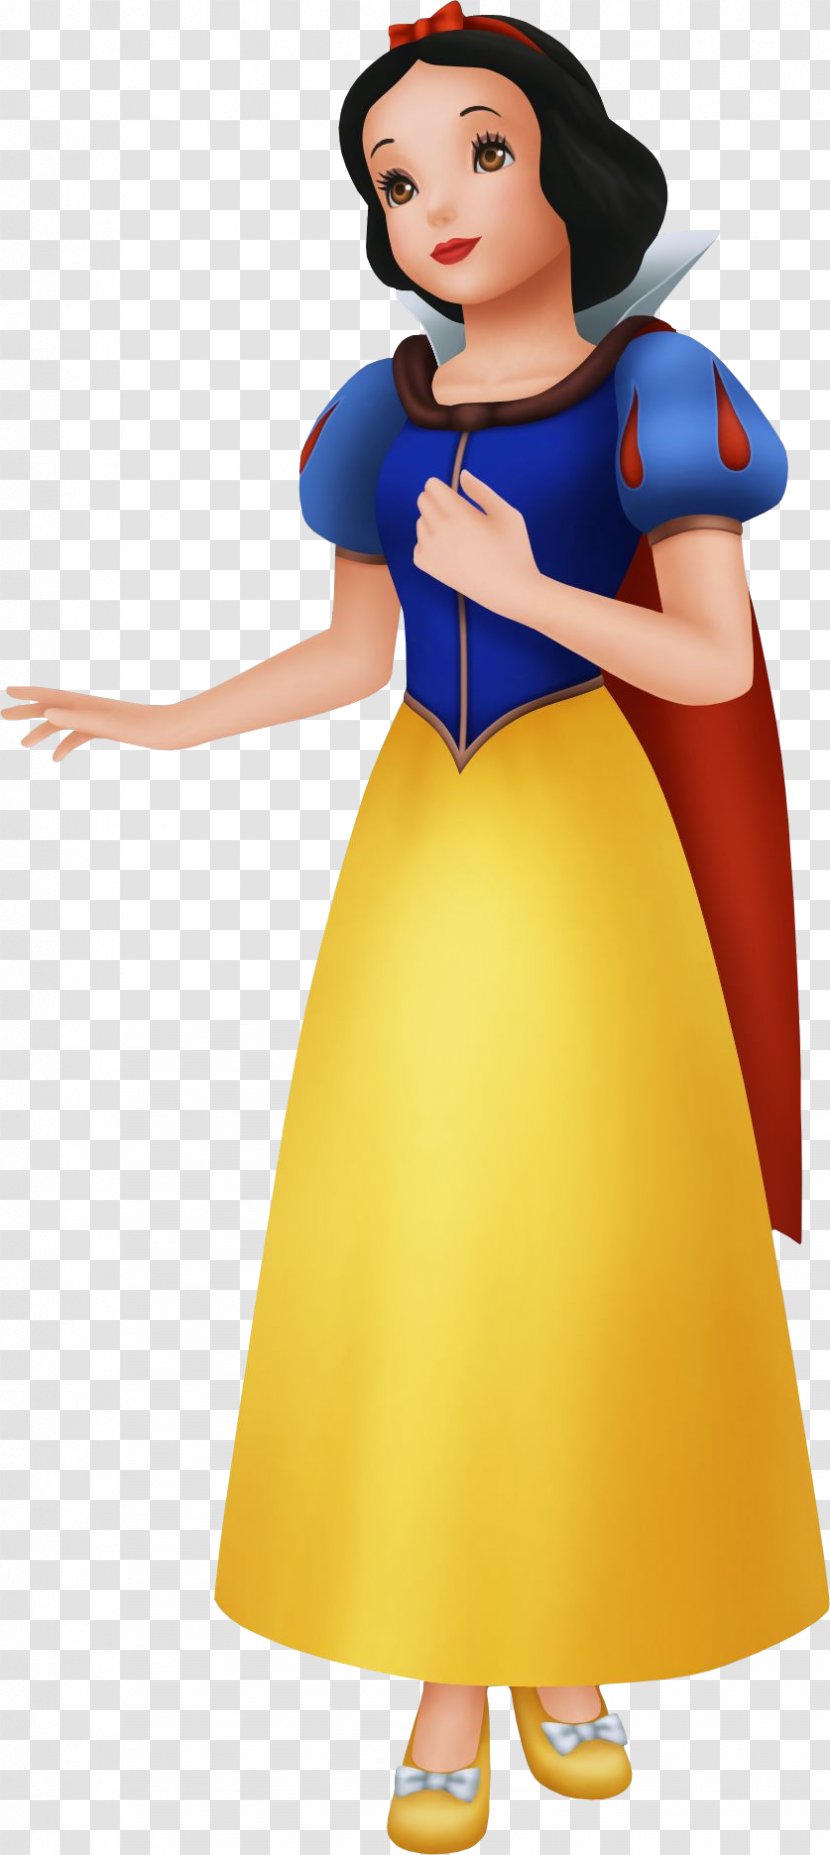 Snow White And The Seven Dwarfs Evil Queen - Silhouette Transparent PNG